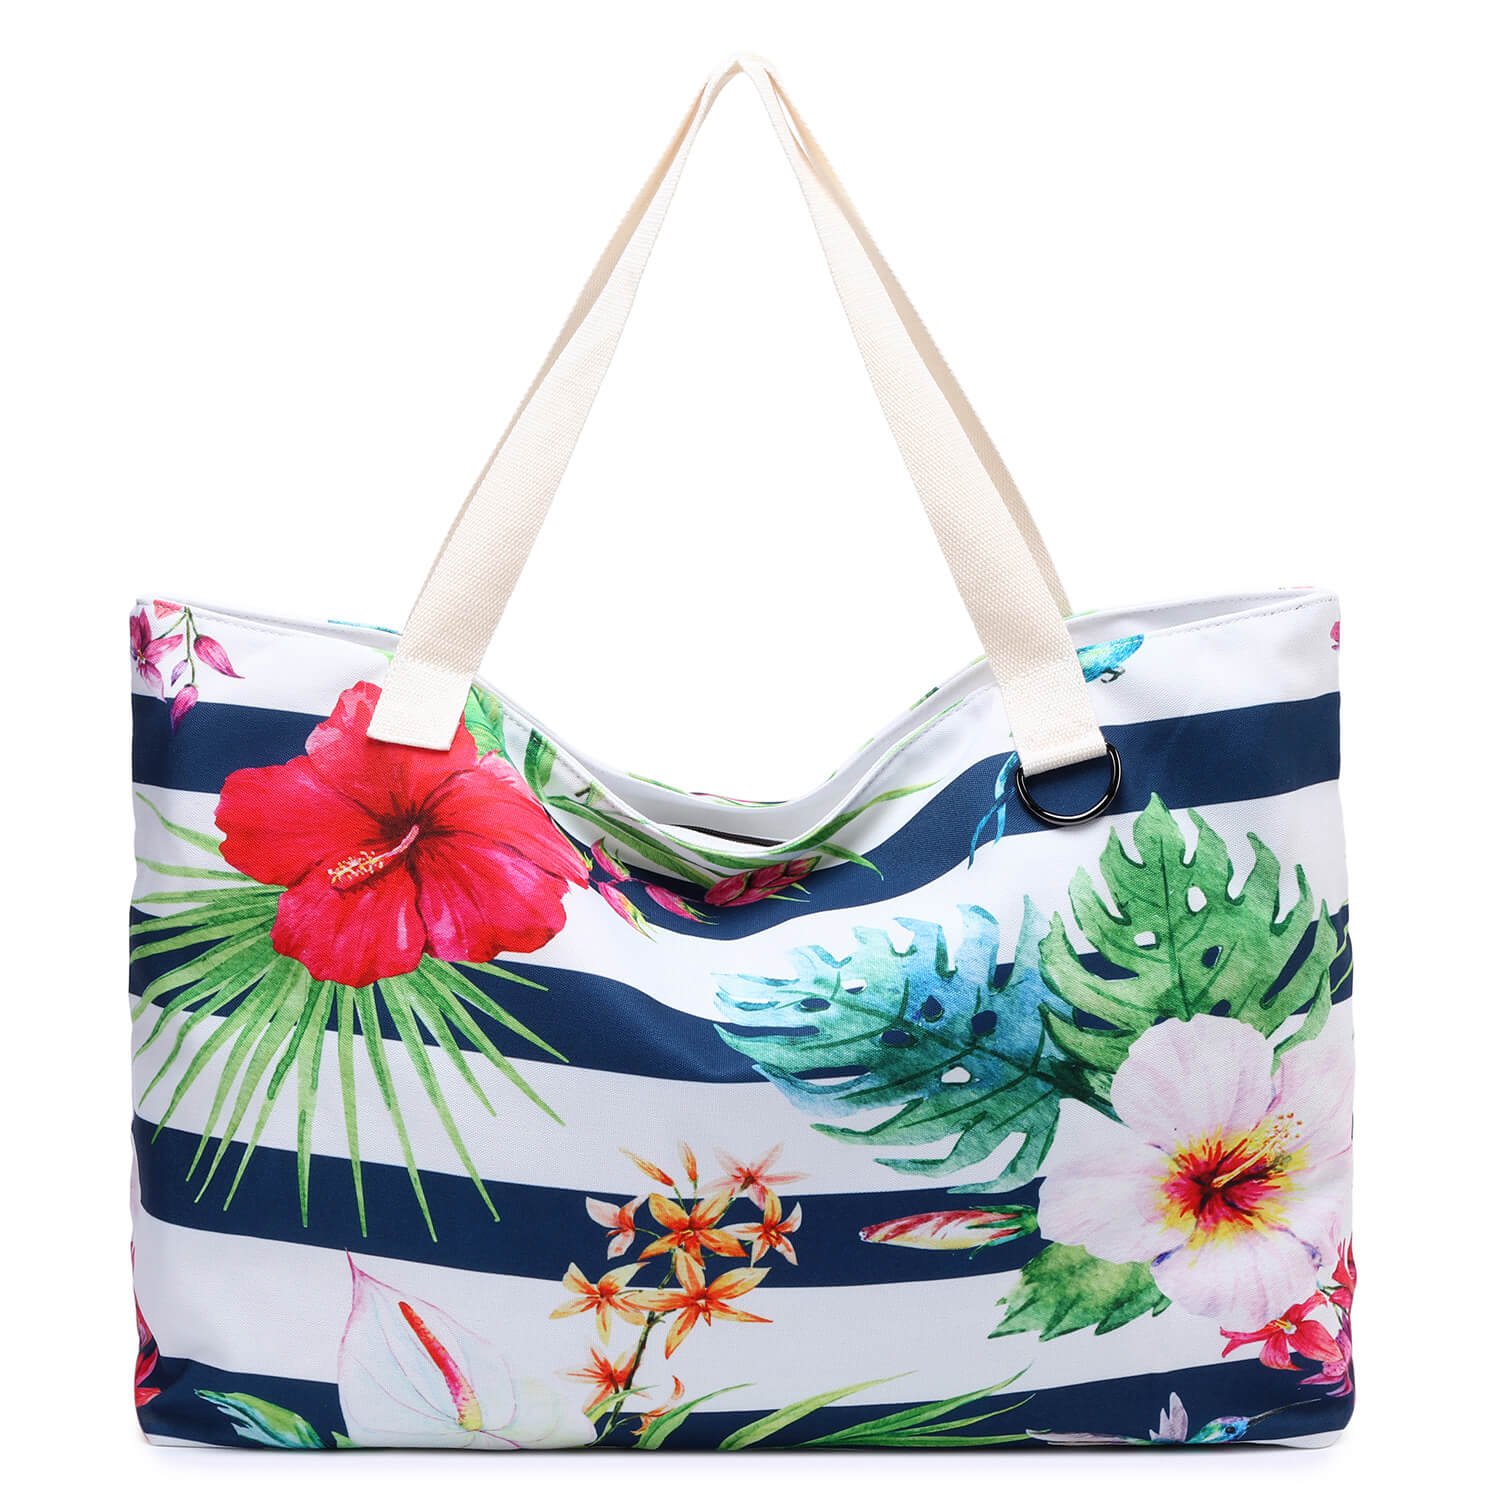 14 Large Beach Bags With Cute Coastal Styles Youll Love  LoveToKnow